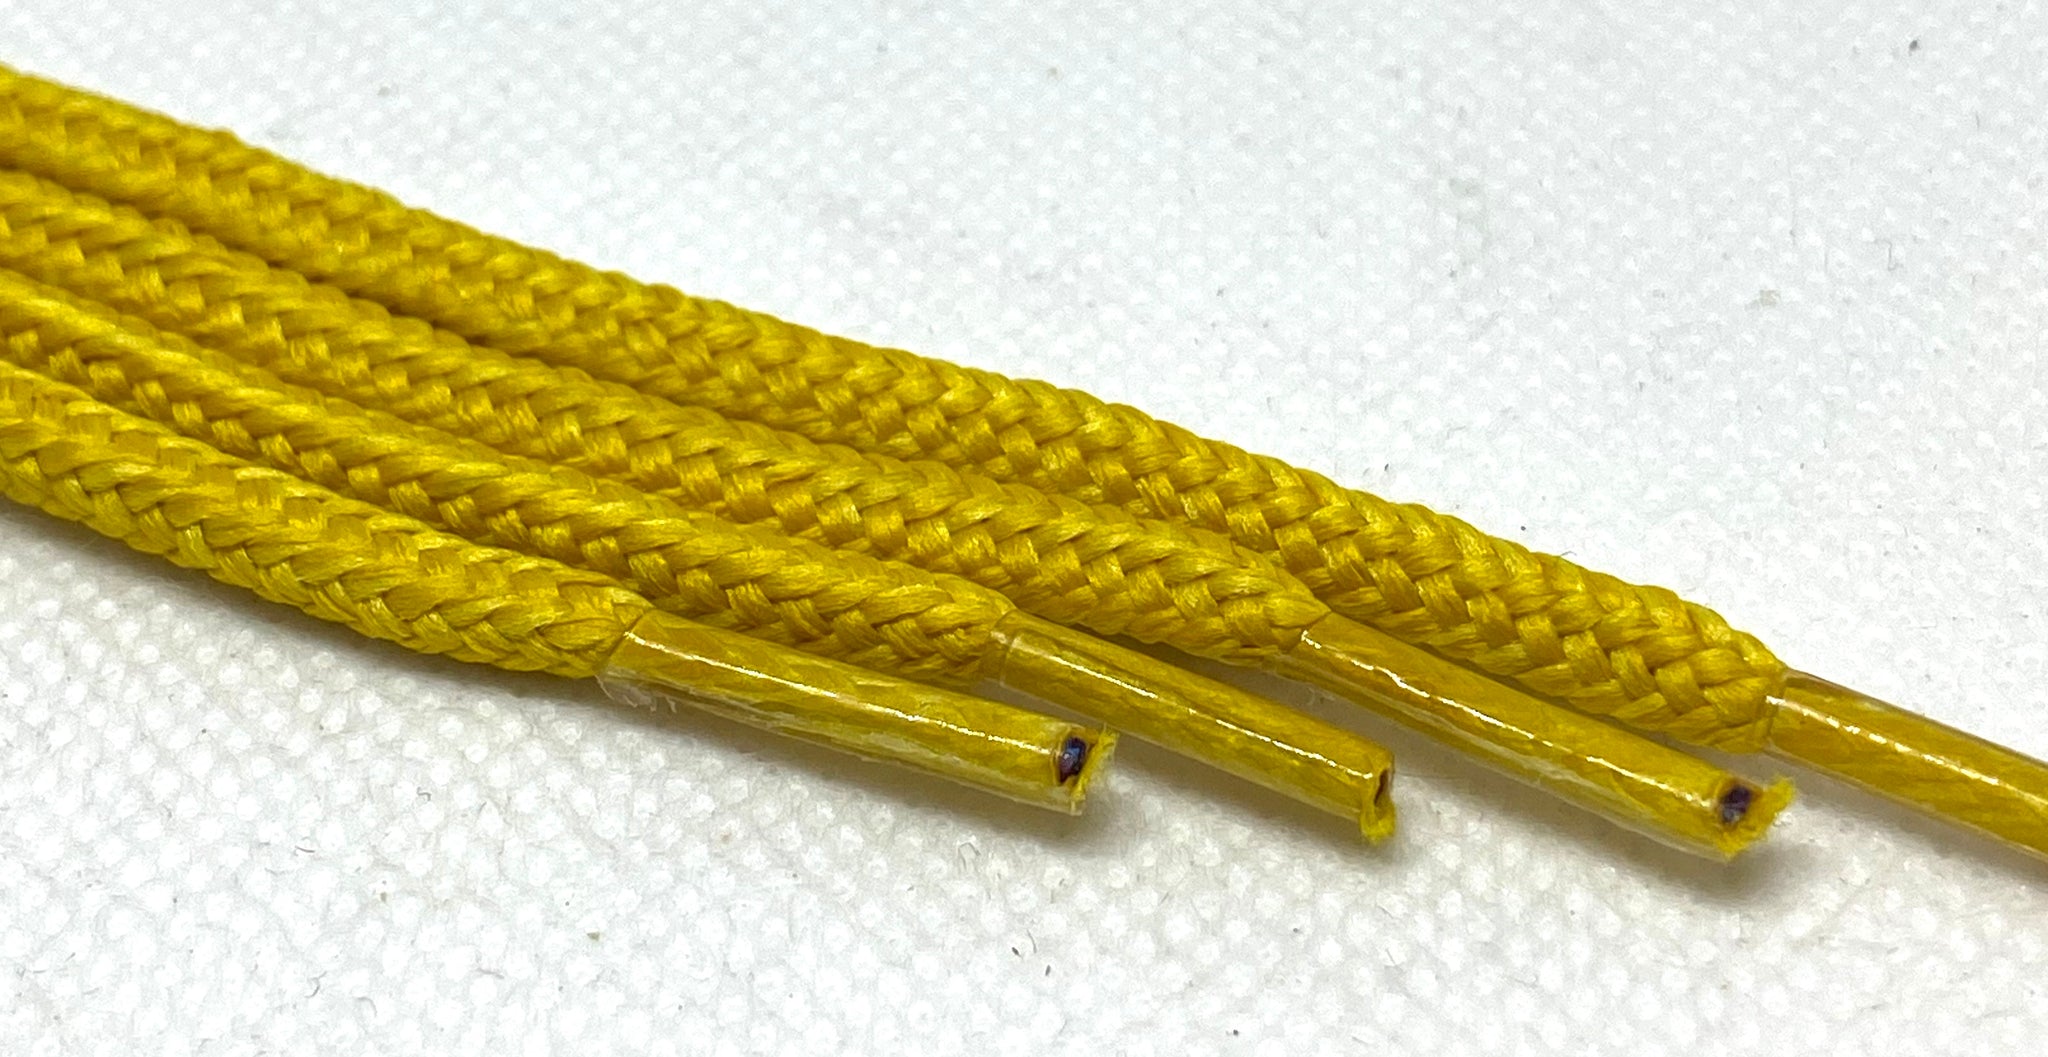 Round Solid Shoelaces - Mustard Yellow